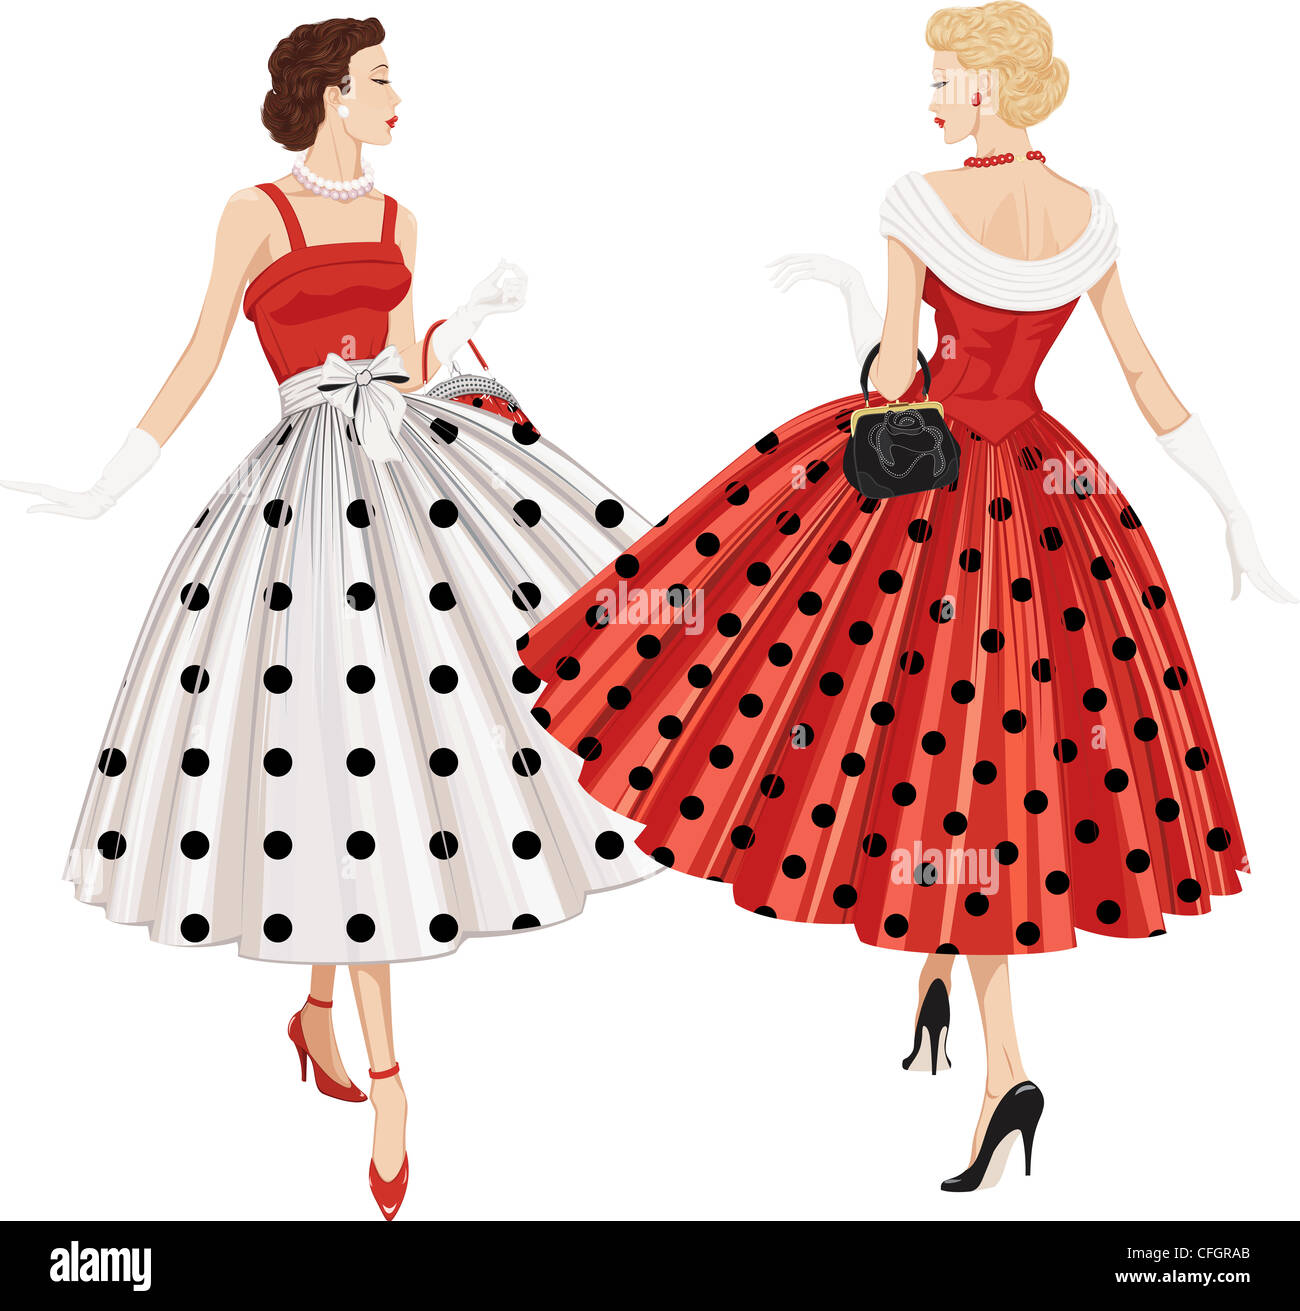 50s fashion Cut Out Stock Images & Pictures - Alamy